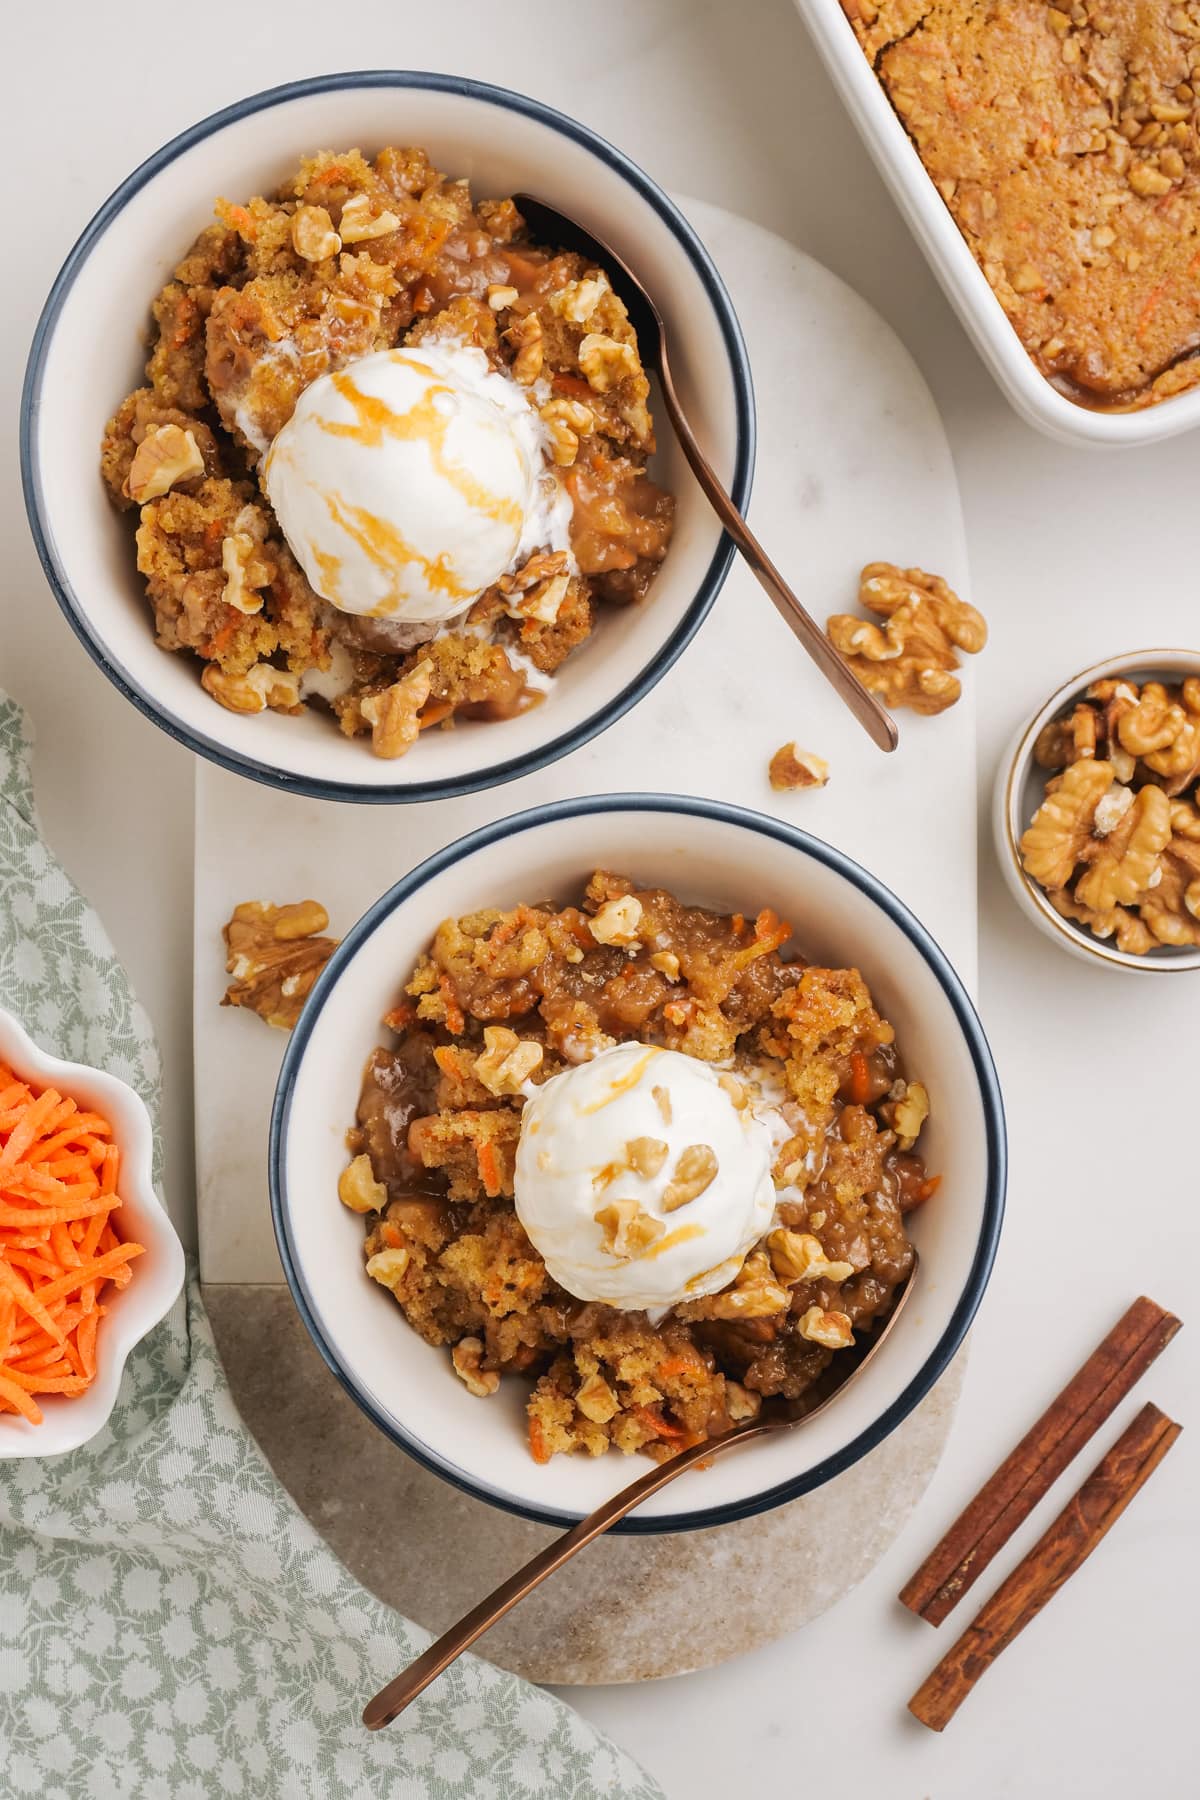 2 bowls with carrot cake cobbler and a scoop of ice cream